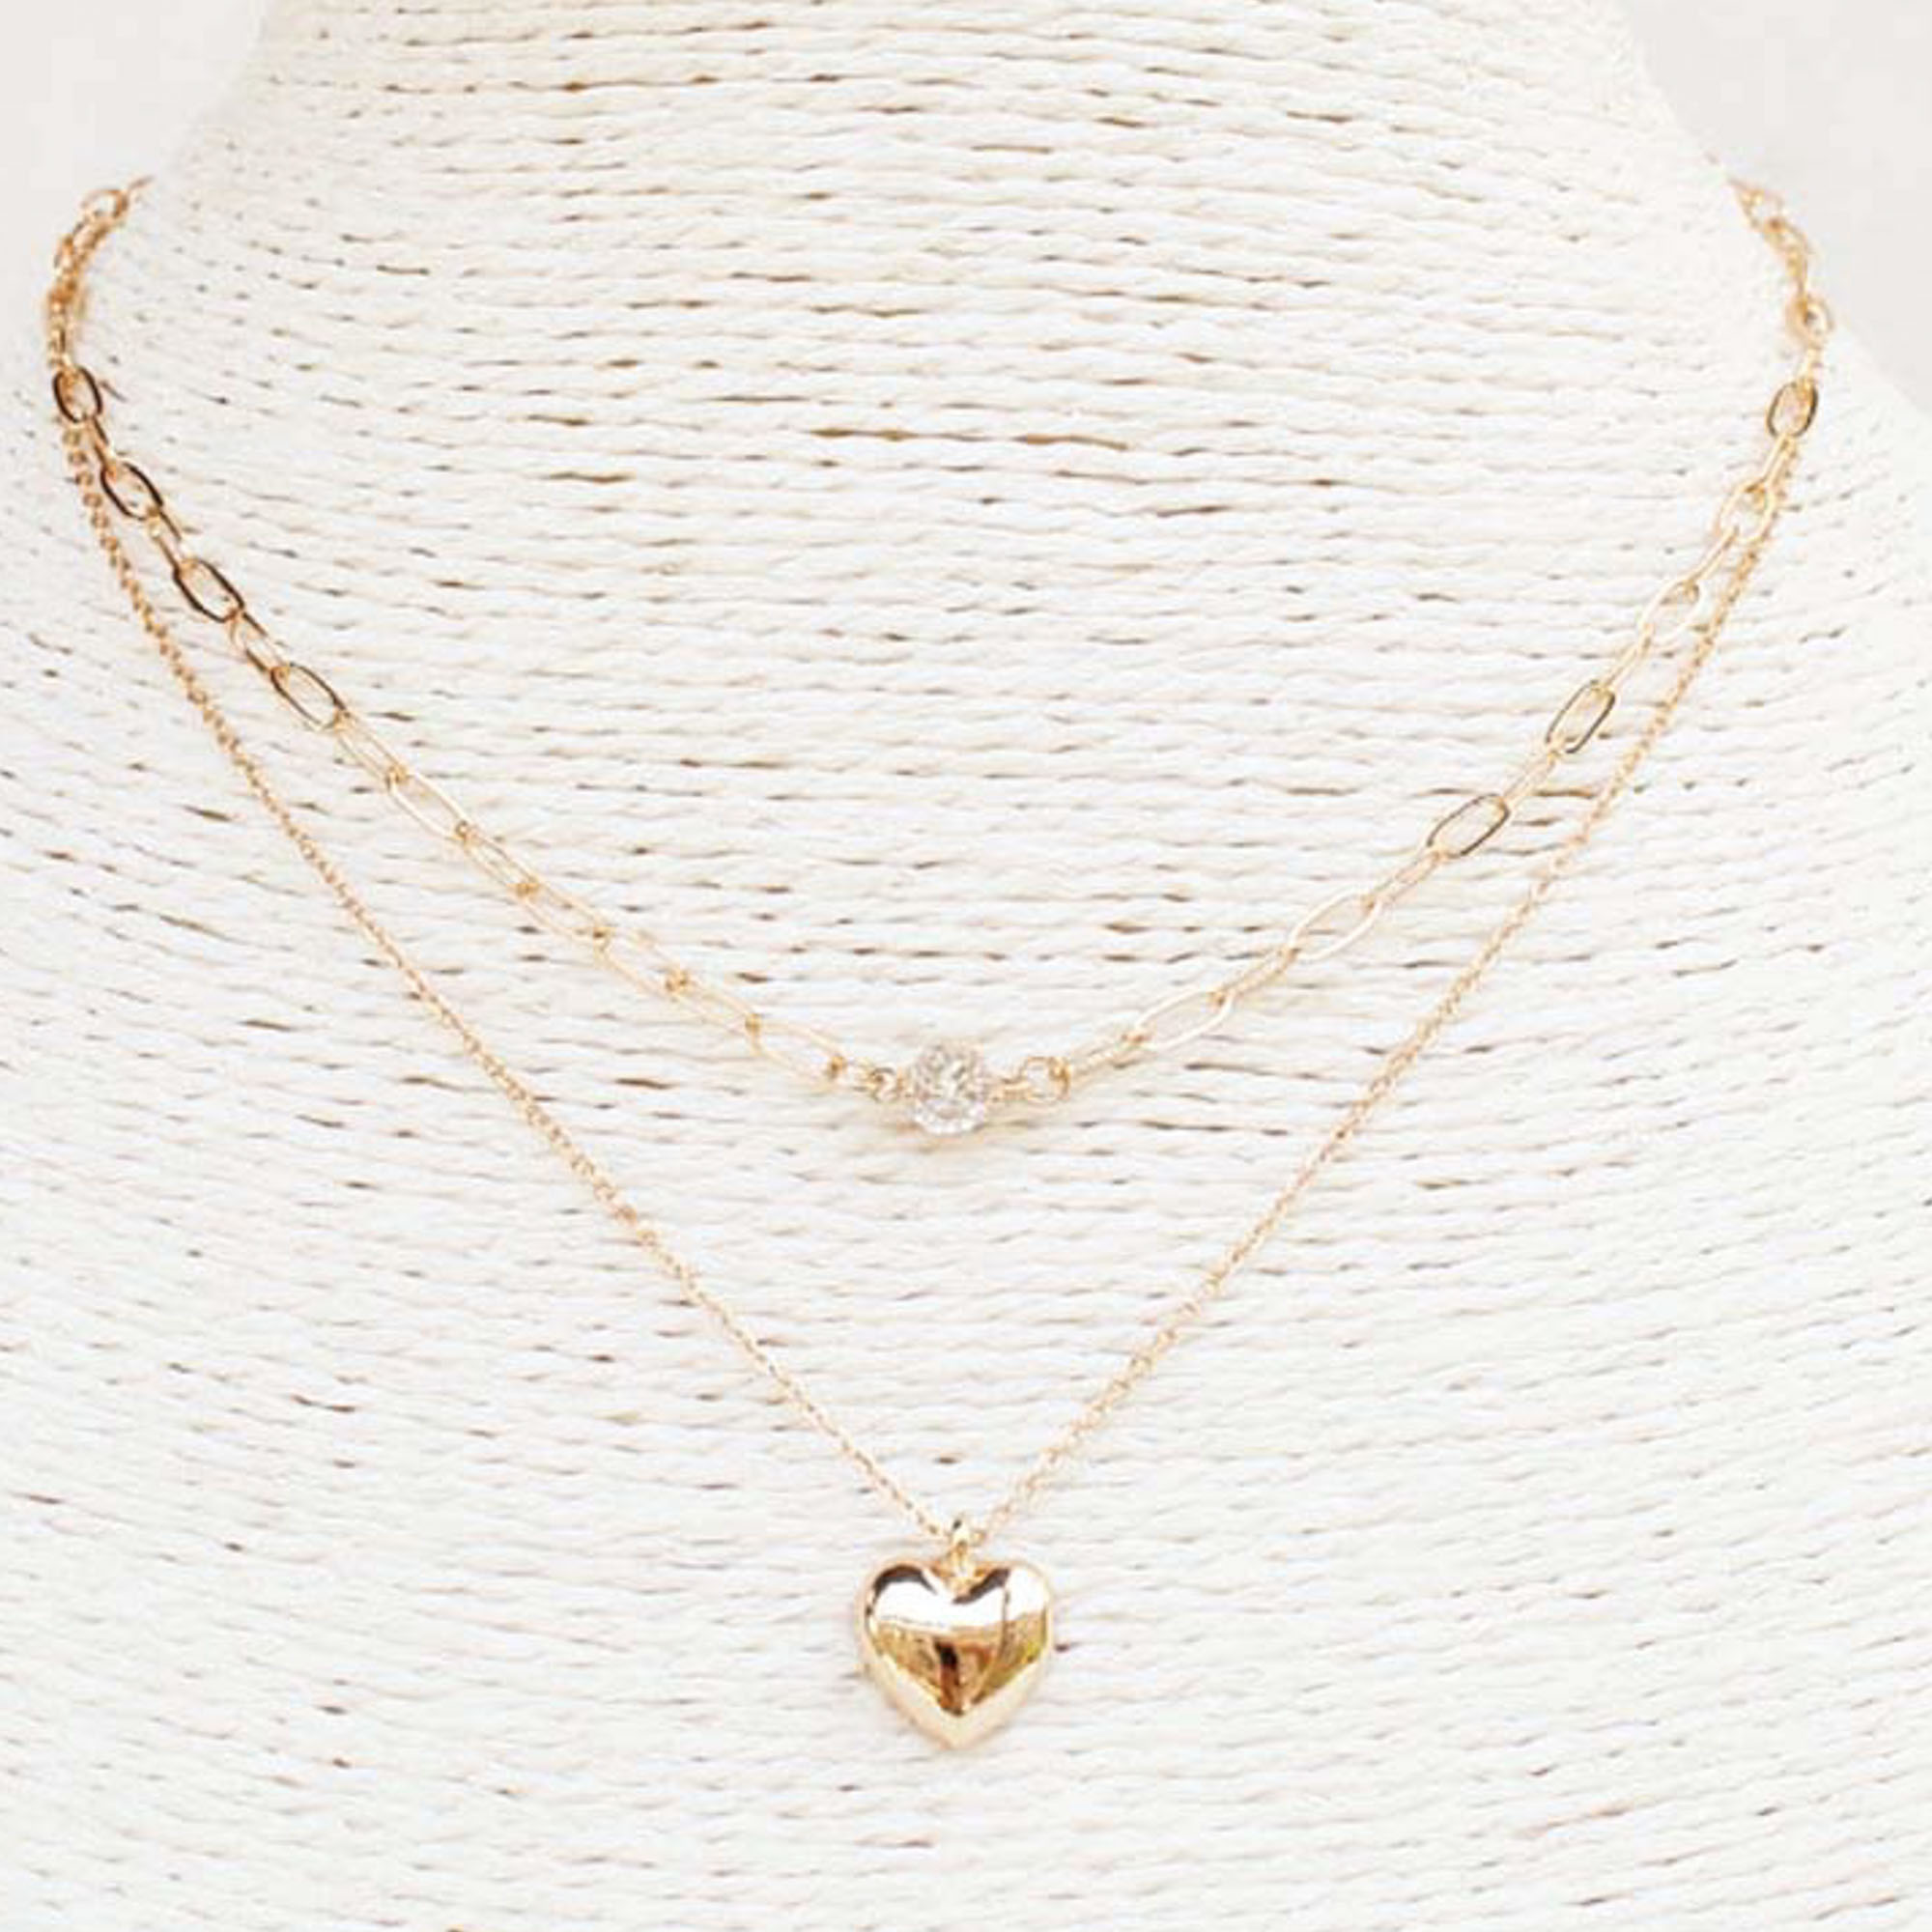 2 LAYERED METAL CHAIN HEART PENDANT NECKLACE